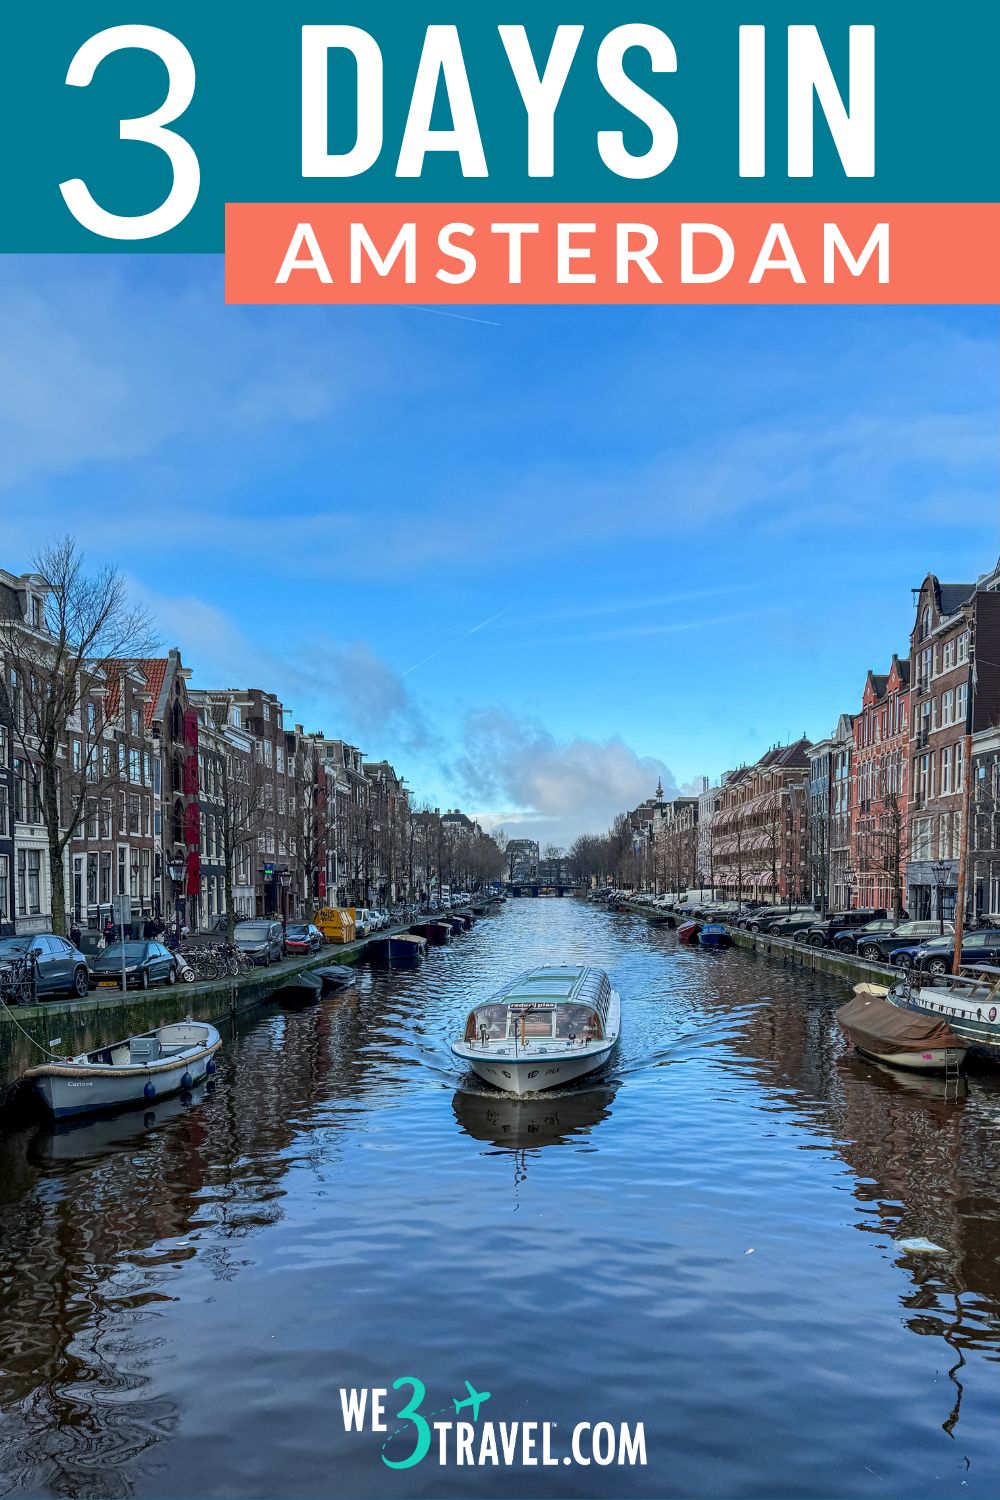 If you are planning three days in Amsterdam, this itinerary lays out a day-by-day plan that covers the highlights but also gives you time to be spontaneous and enjoy the city. Just what you need to plan your vacation to The Netherlands